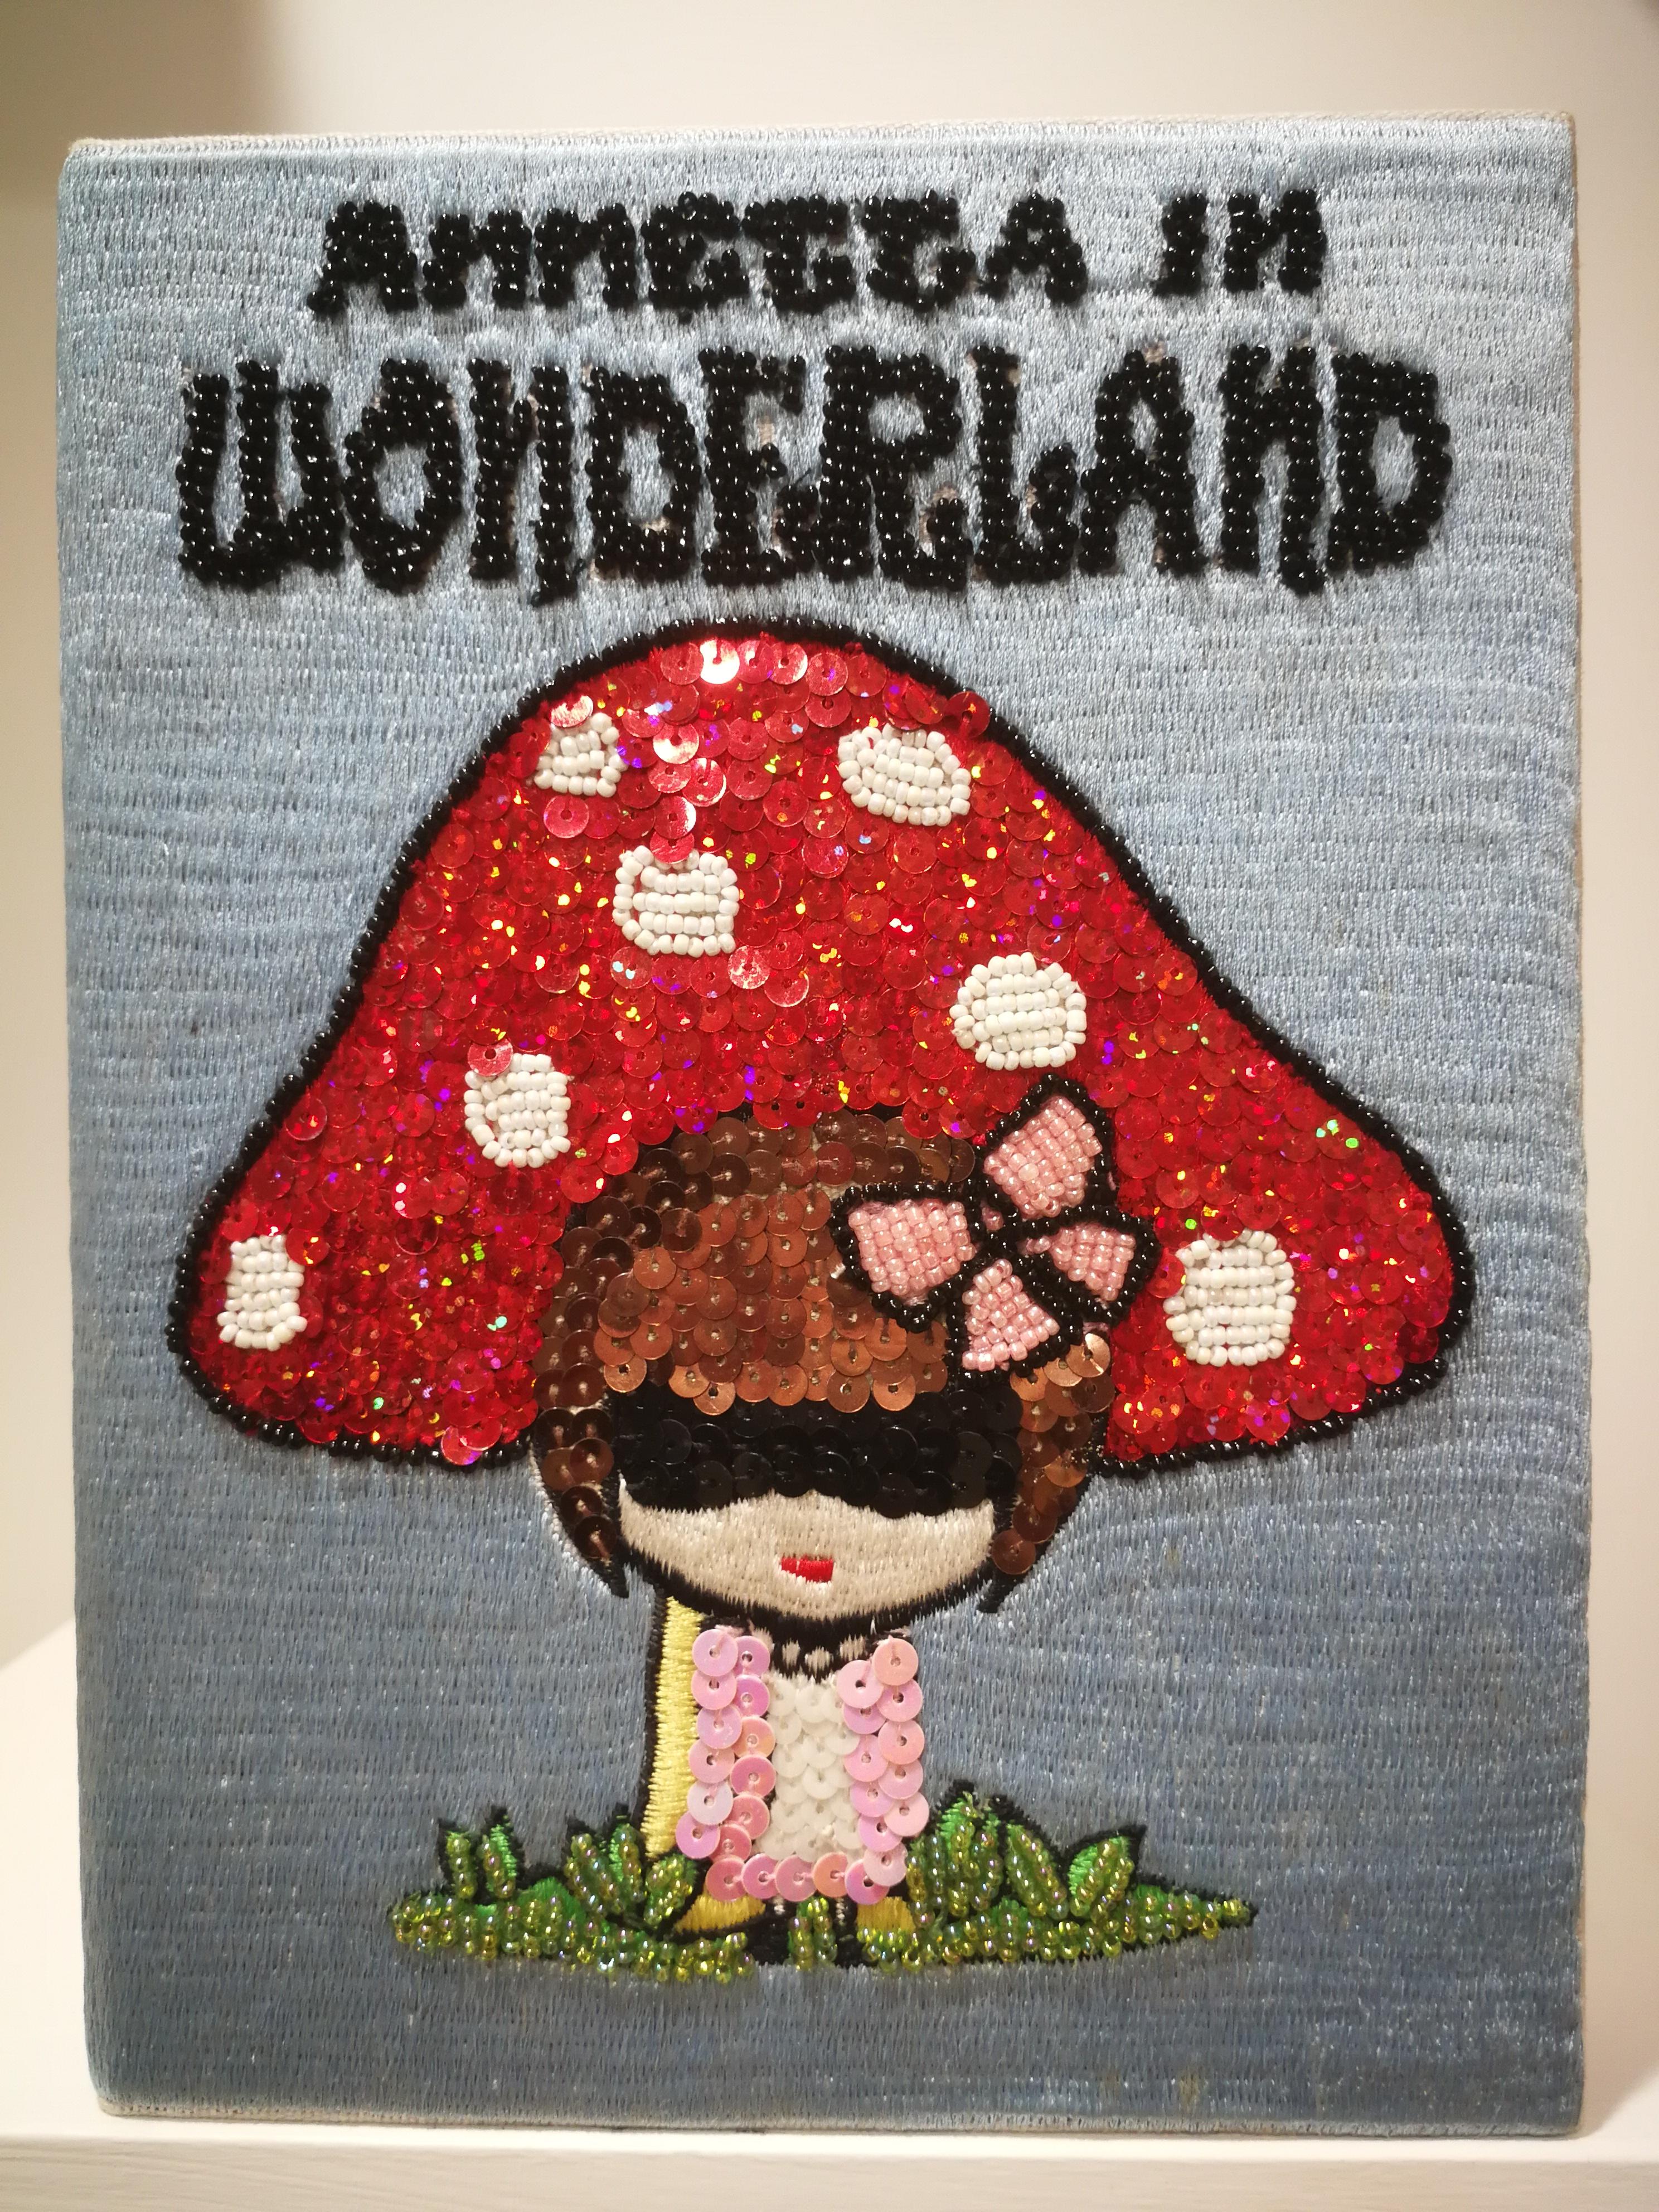 Mua Mua Annetta in Wonderland Book Pochette / Shoulder Bag
Inspired to the famous editor Anna Wintour 

totally handmade bag embellished with sequins and beads
inside a small mirror and a shoulder strap
measurements: 23 x 17 cm
depth 3,5 cm